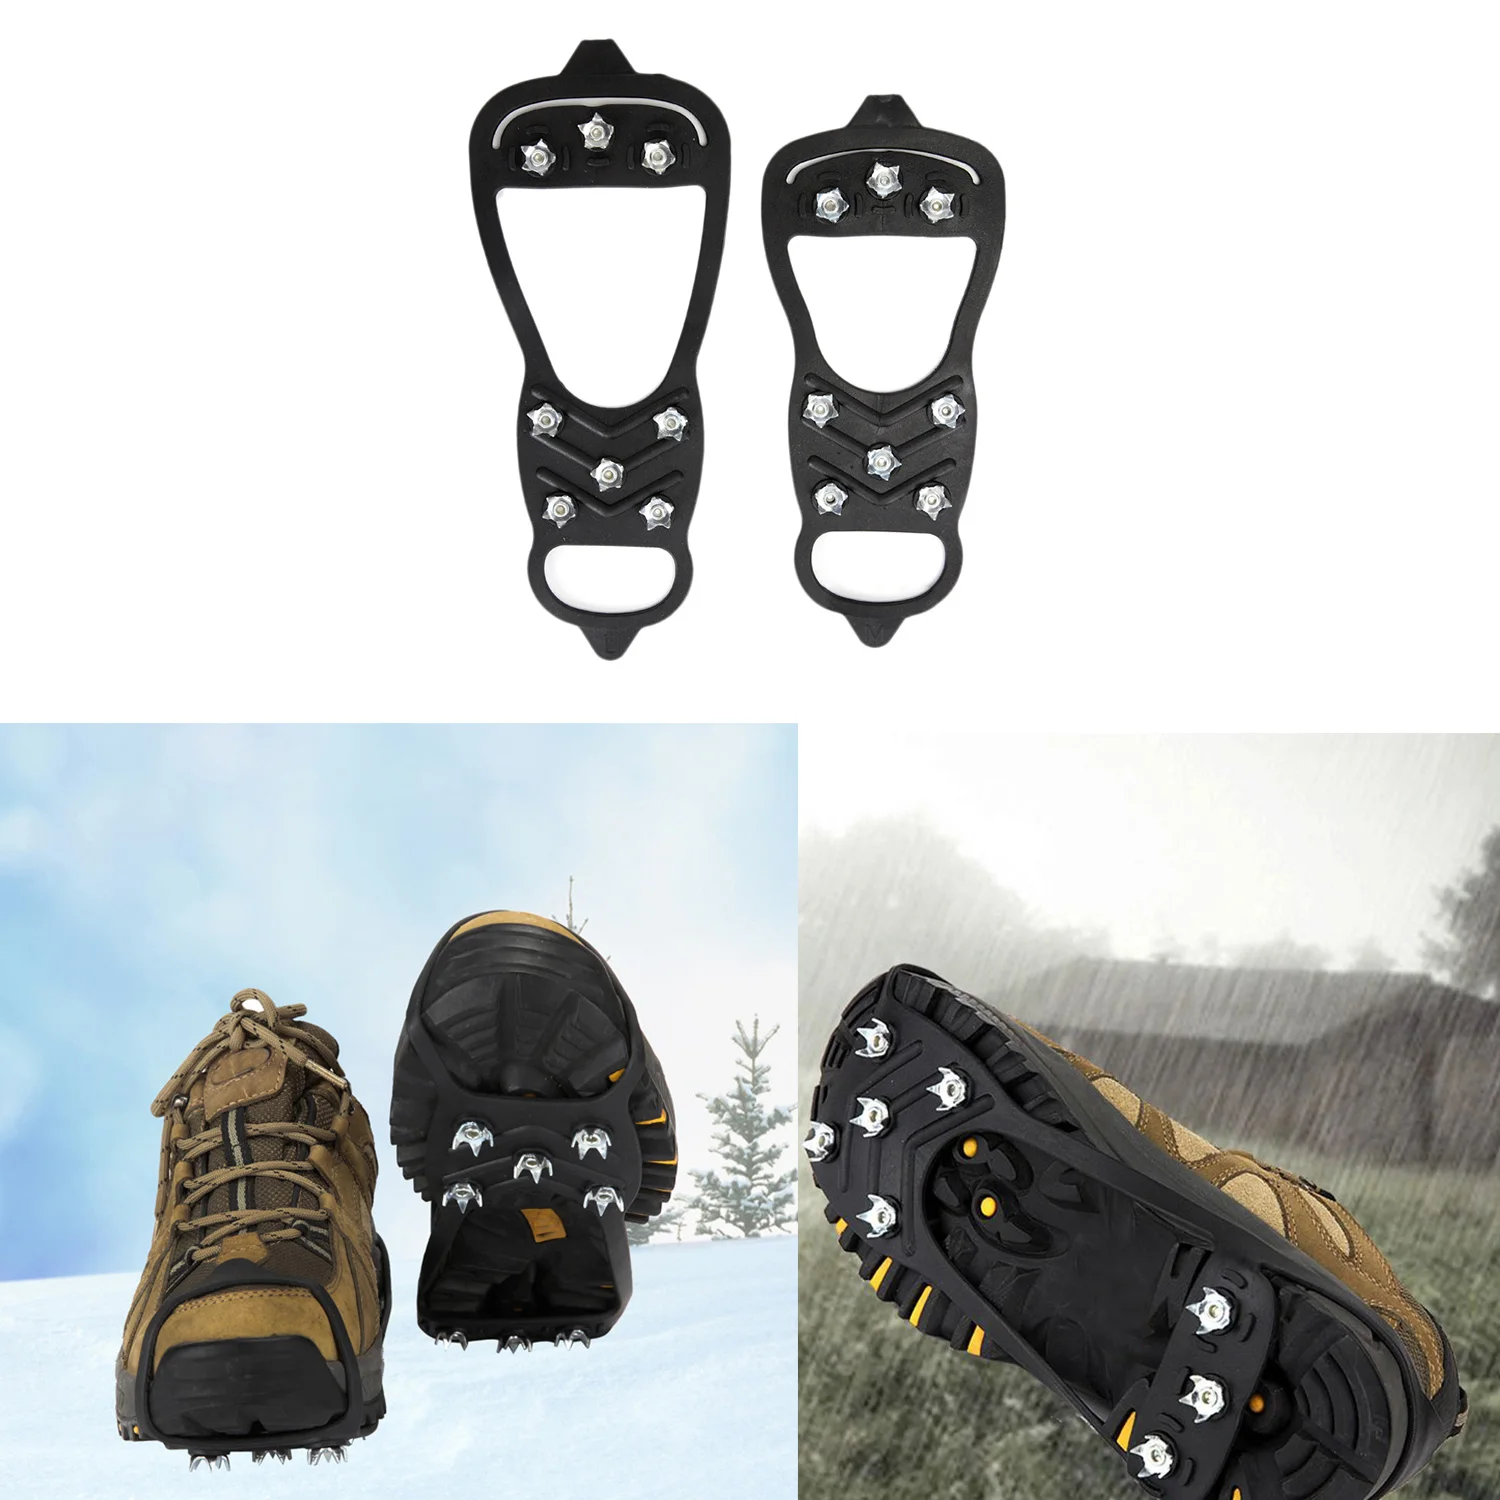 

NEW-8 Nails Ice Floes Gripper For Shoes Snow Crampons Anti-Slip Ice Gripper Hiking Cleats Spikes Traction Ice Stud Shoes Grip